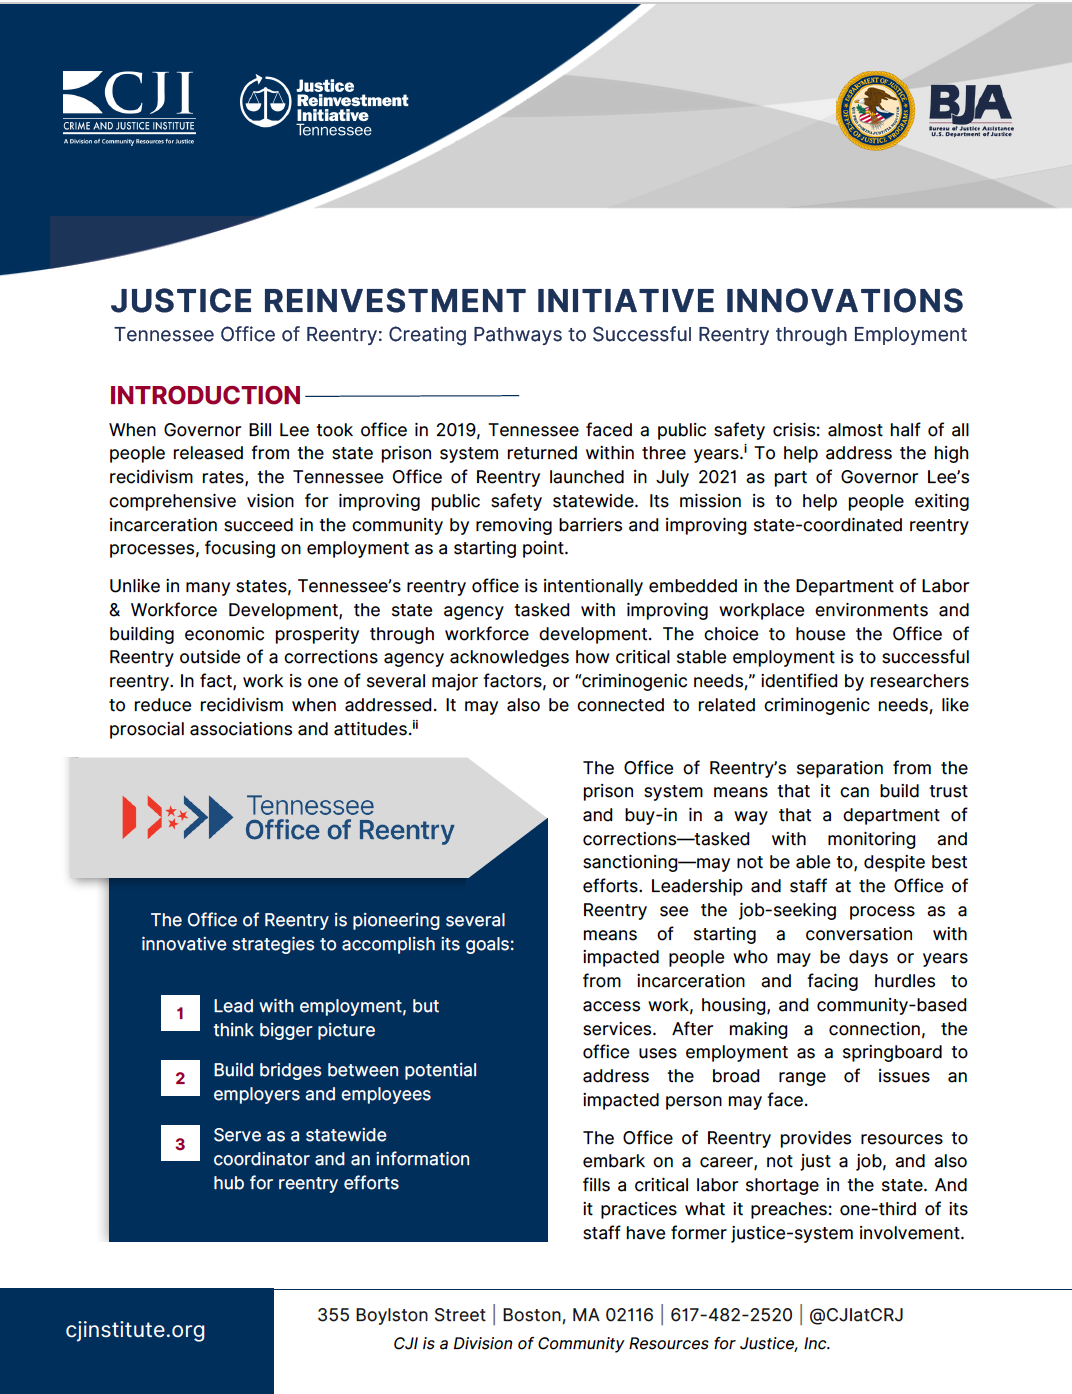 Justice Reinvestment Initiative Innovations: Tennessee Office of Reentry: Creating Pathways to Successful Reentry through Employment